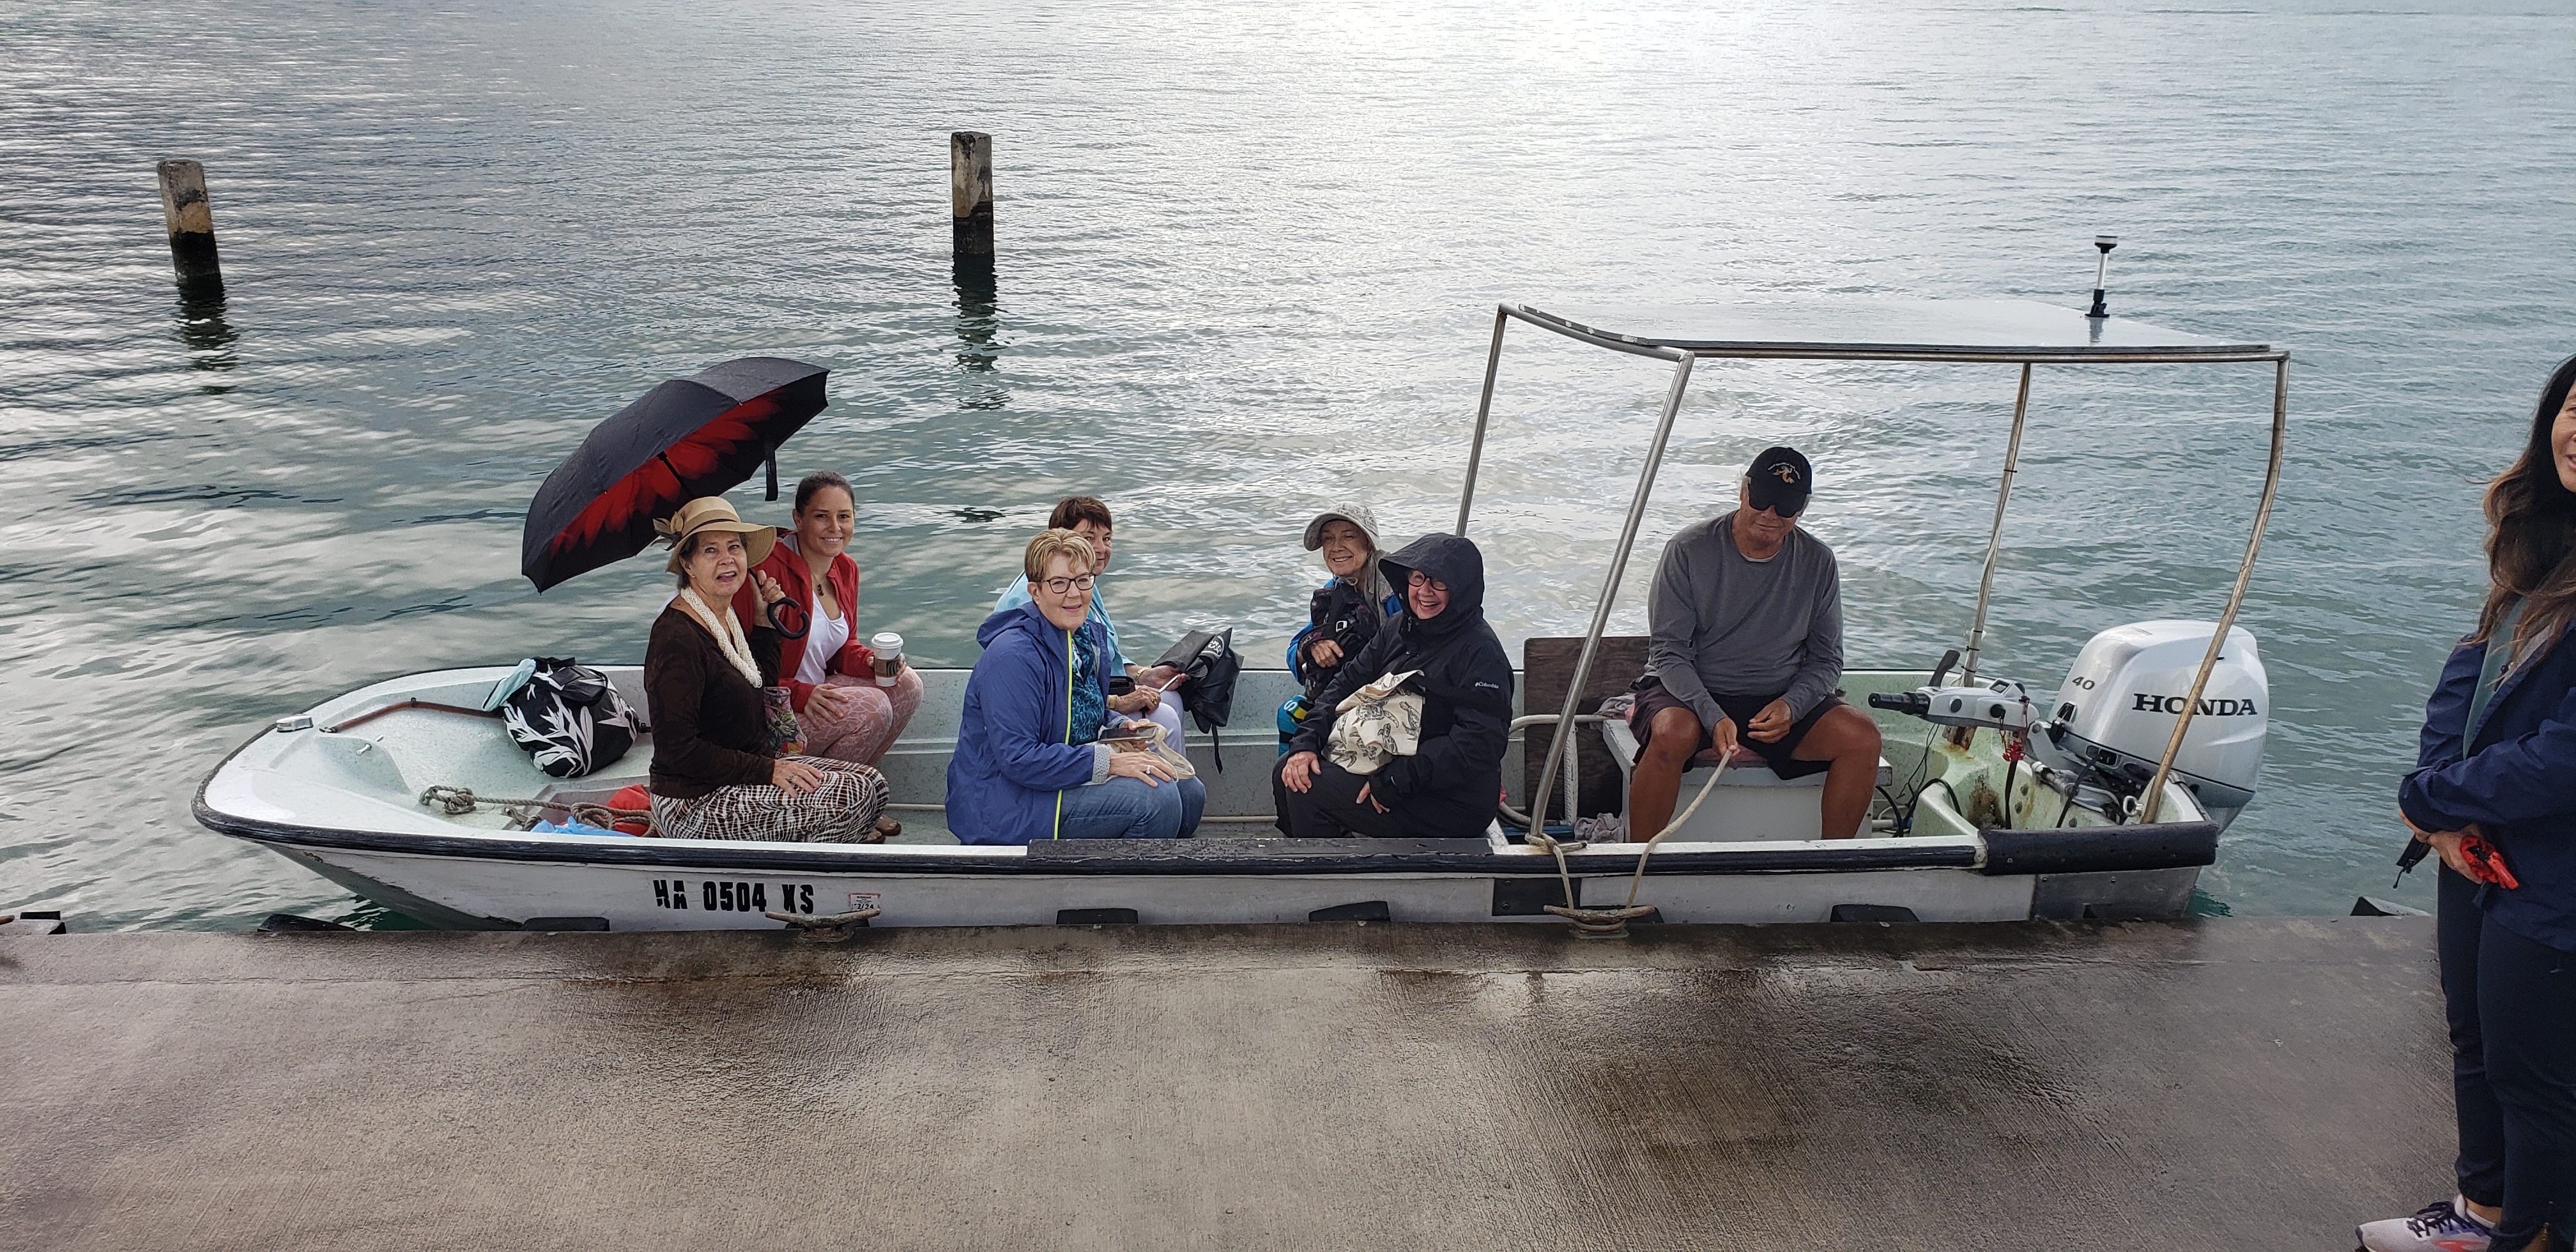 Tour participants on outboard motor boat